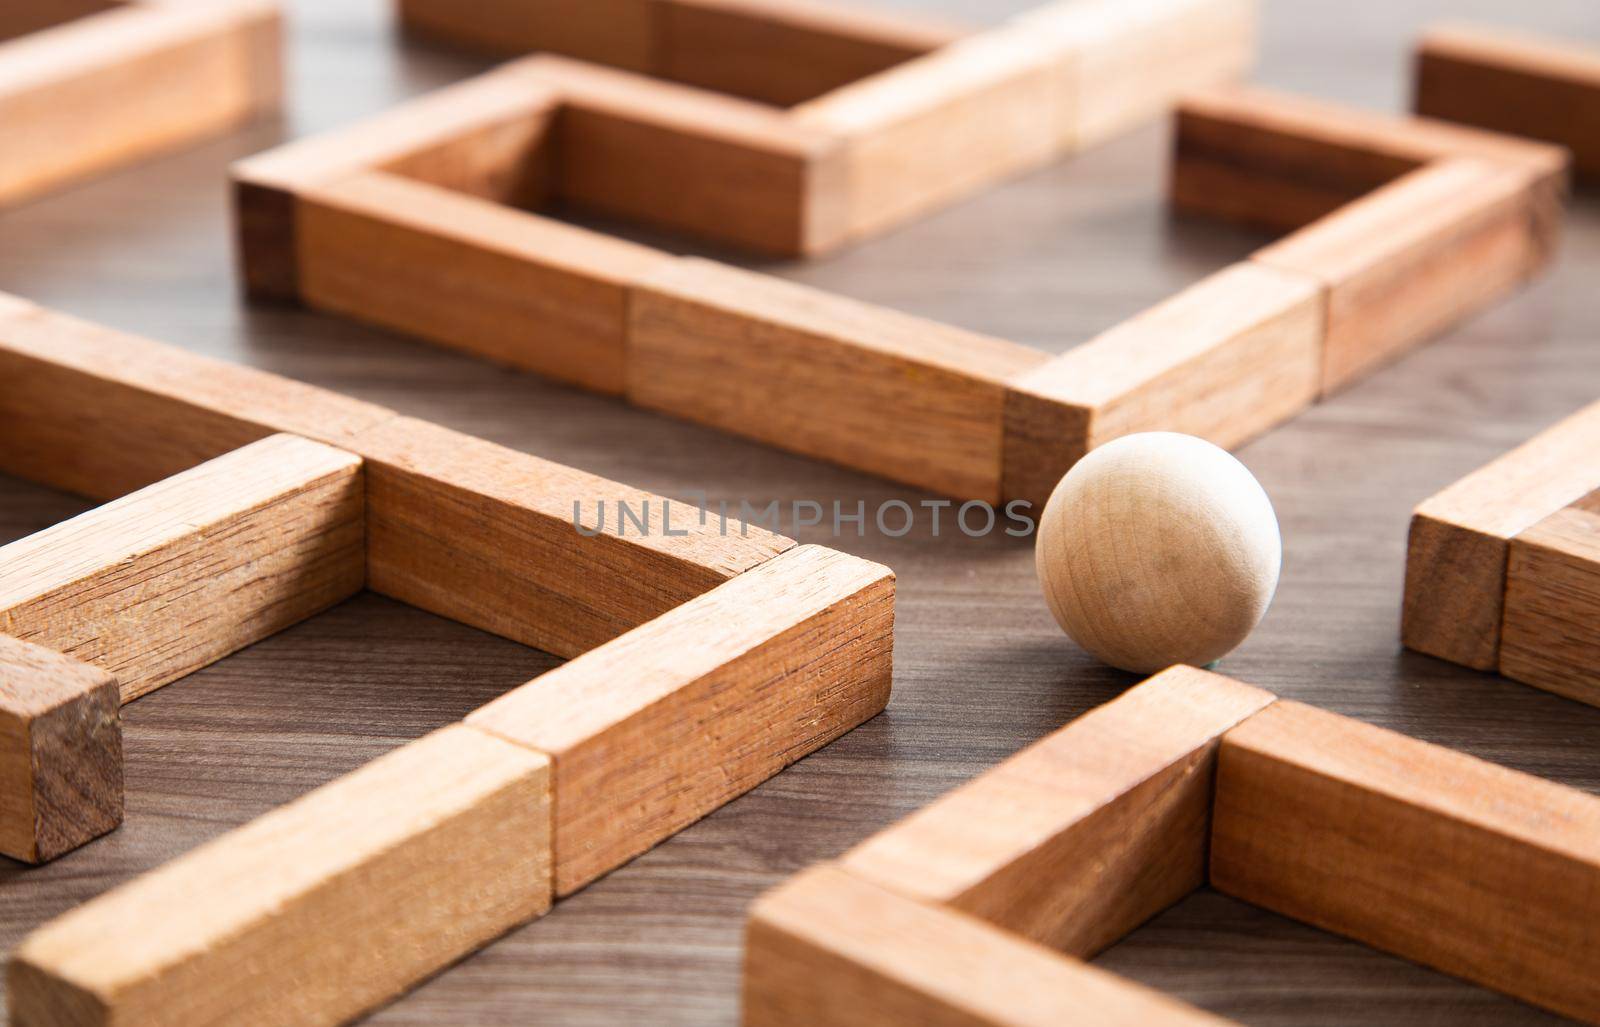 concept photo of standing in a maze and looking for the best way or solution